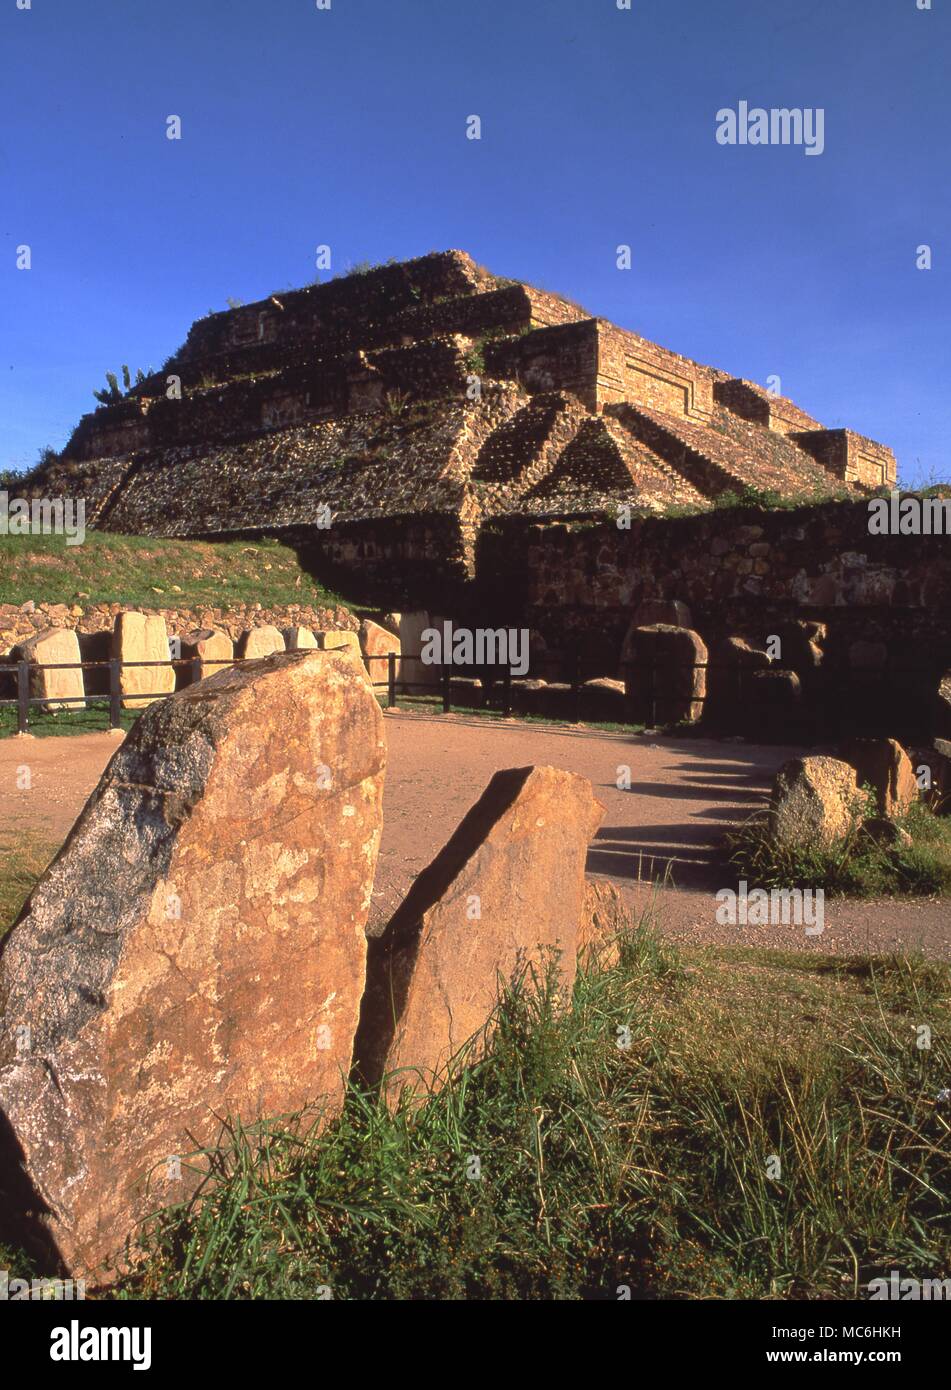 Mexican Archaeology. Monte Alban has a complex history, its buildings cover periods dating from 600BC to 750AD. Stock Photo